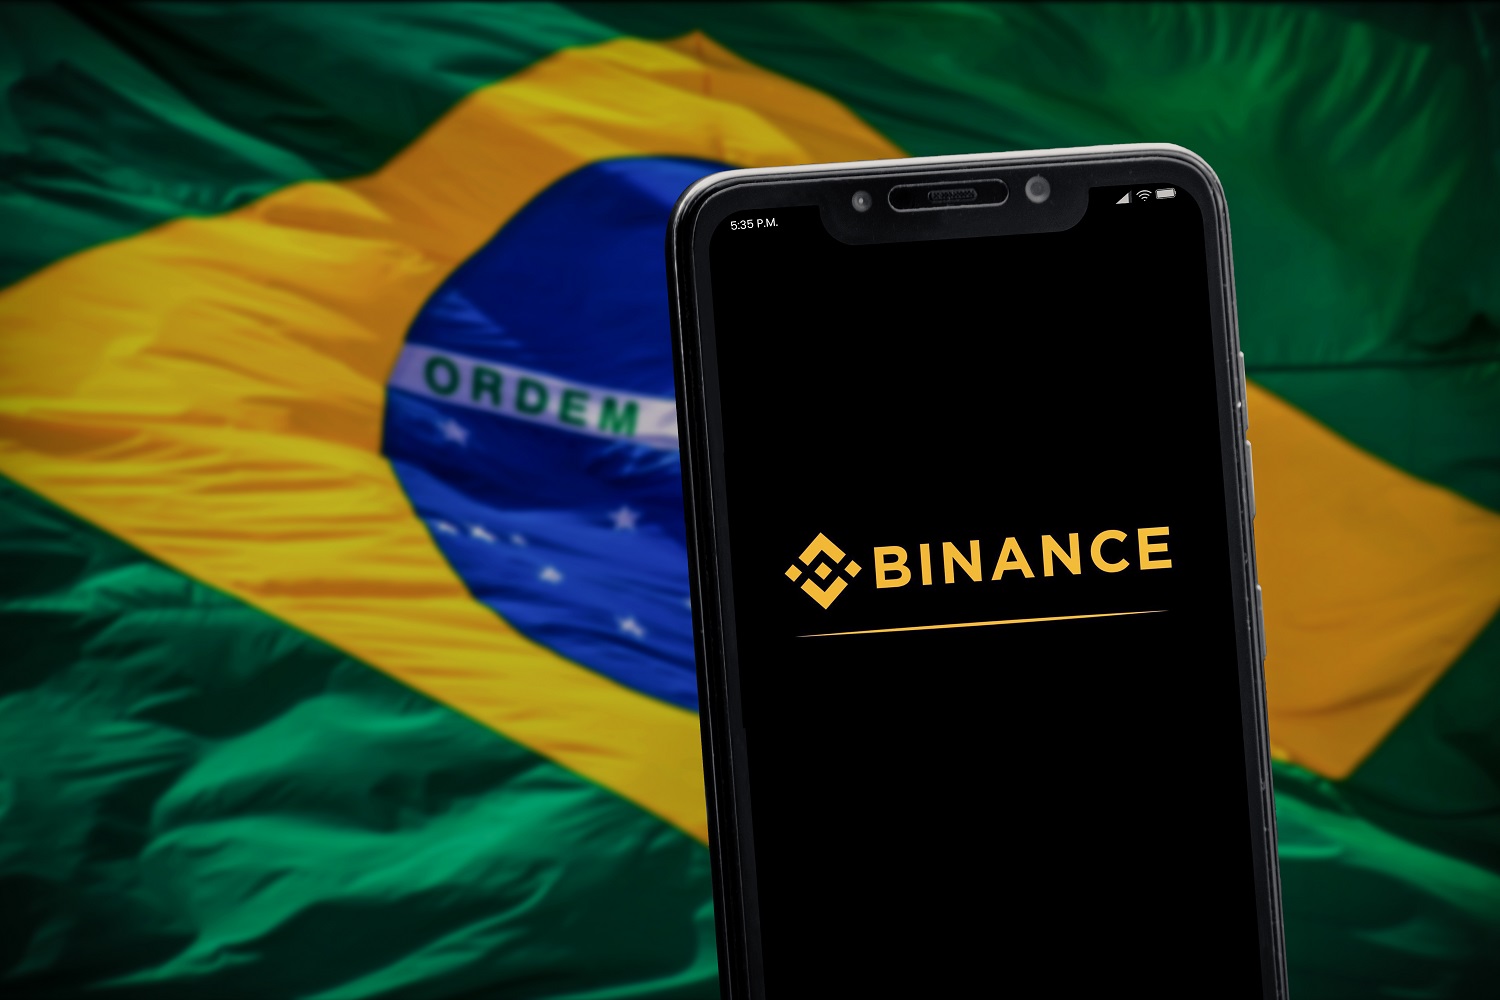 The Binance logo on a smartphone screen against a background of the Brazilian flag.